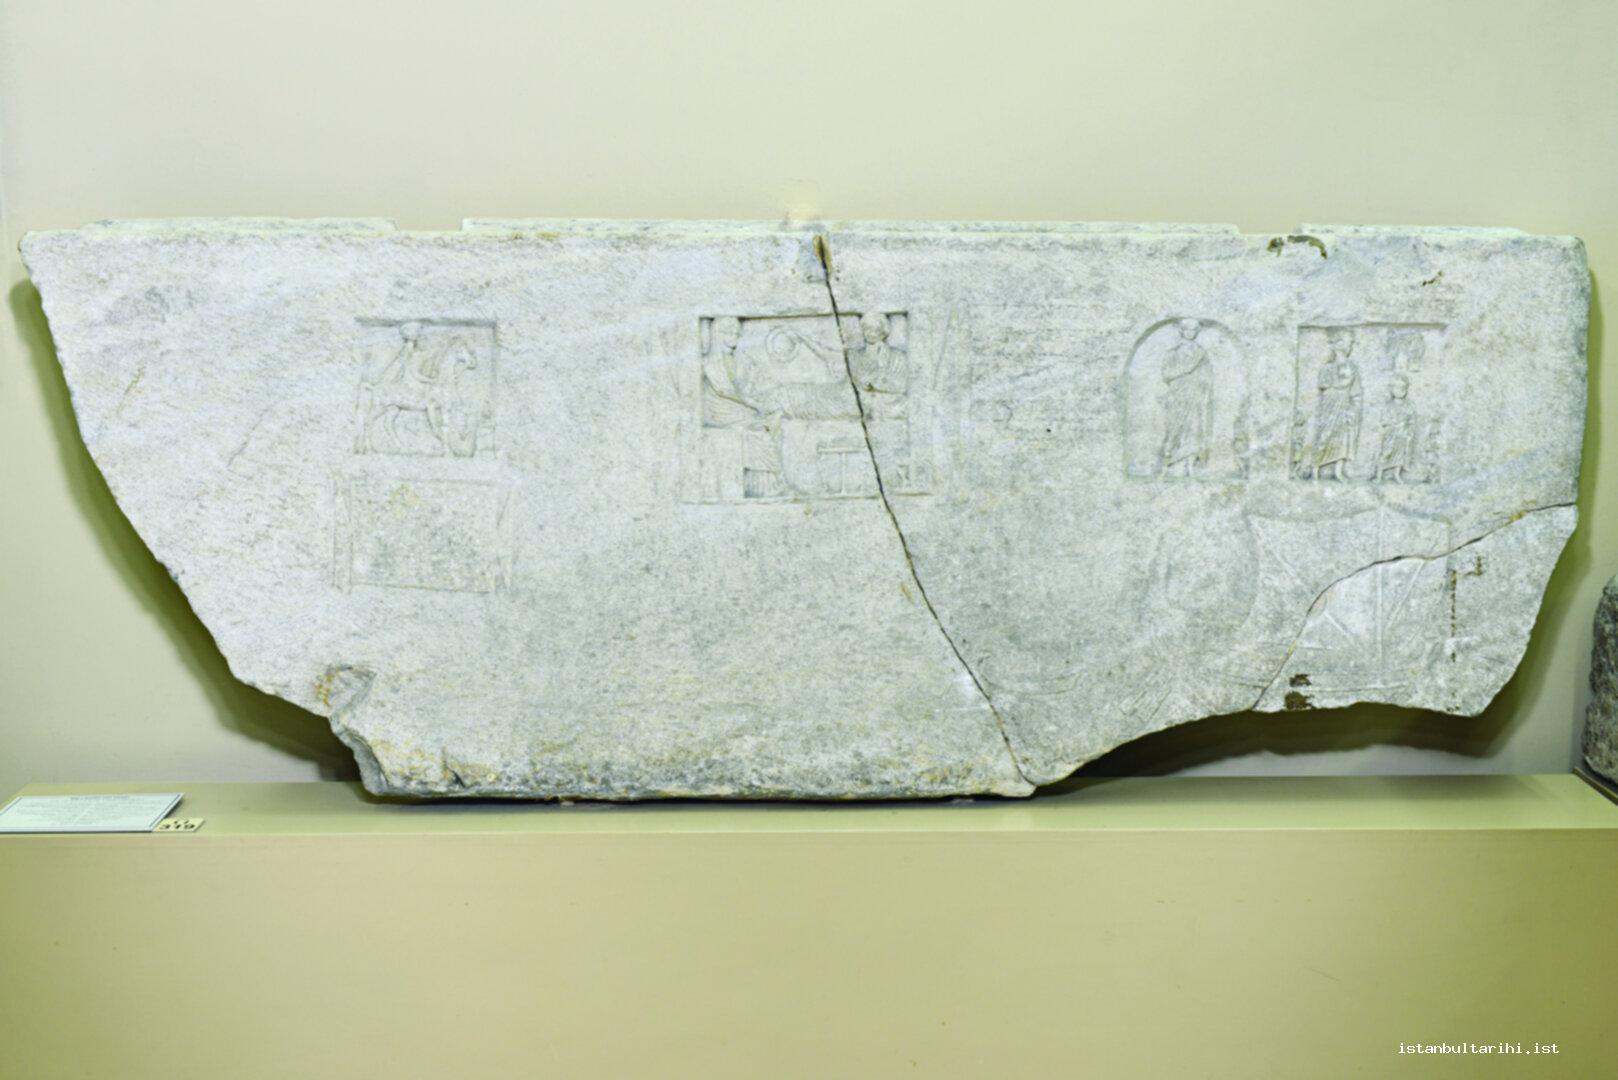 2- The piece of a third century sarcophagus found in Çemberlitaş excavations. The first relief depicts a horseman; the second one depicts a funeral ceremony; the third relief with a curve at its upper side depicts a dressed standing man from the front; the last one depicts a man and a child (Istanbul Archeology Museum)